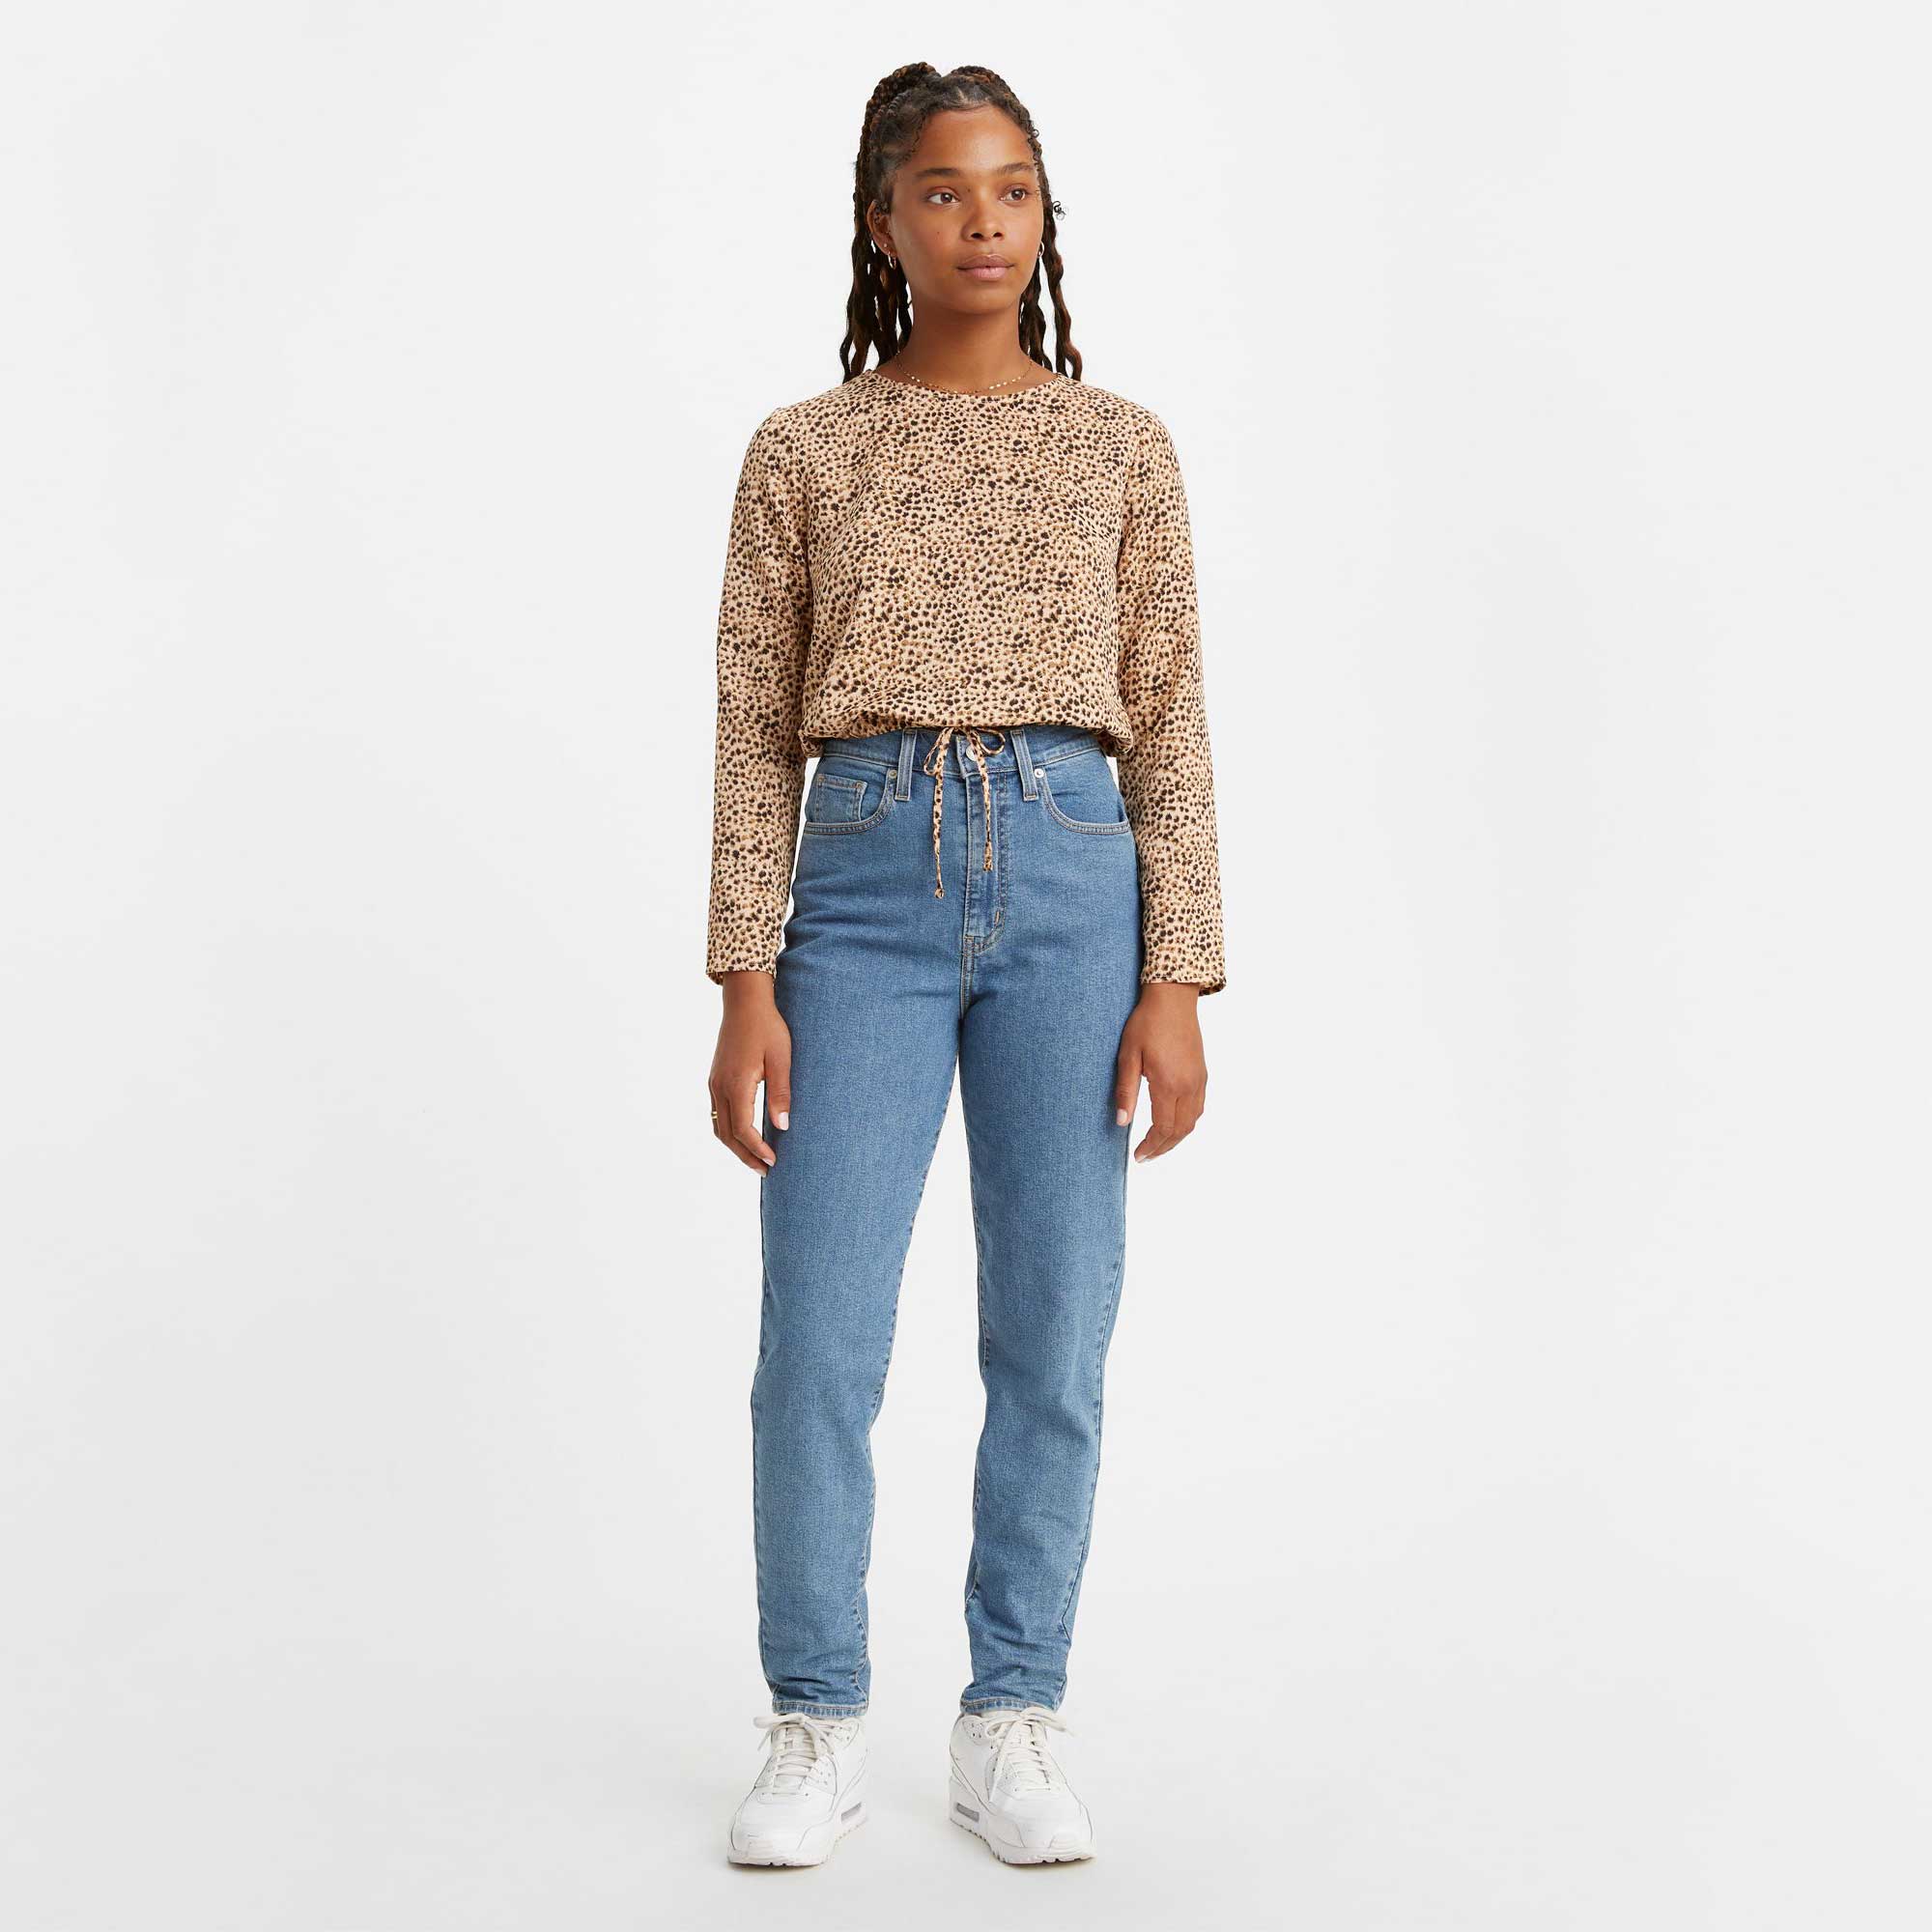 High Waisted Mom Jeans Levis Relaxed Fit Tapered Leg Medium Fade